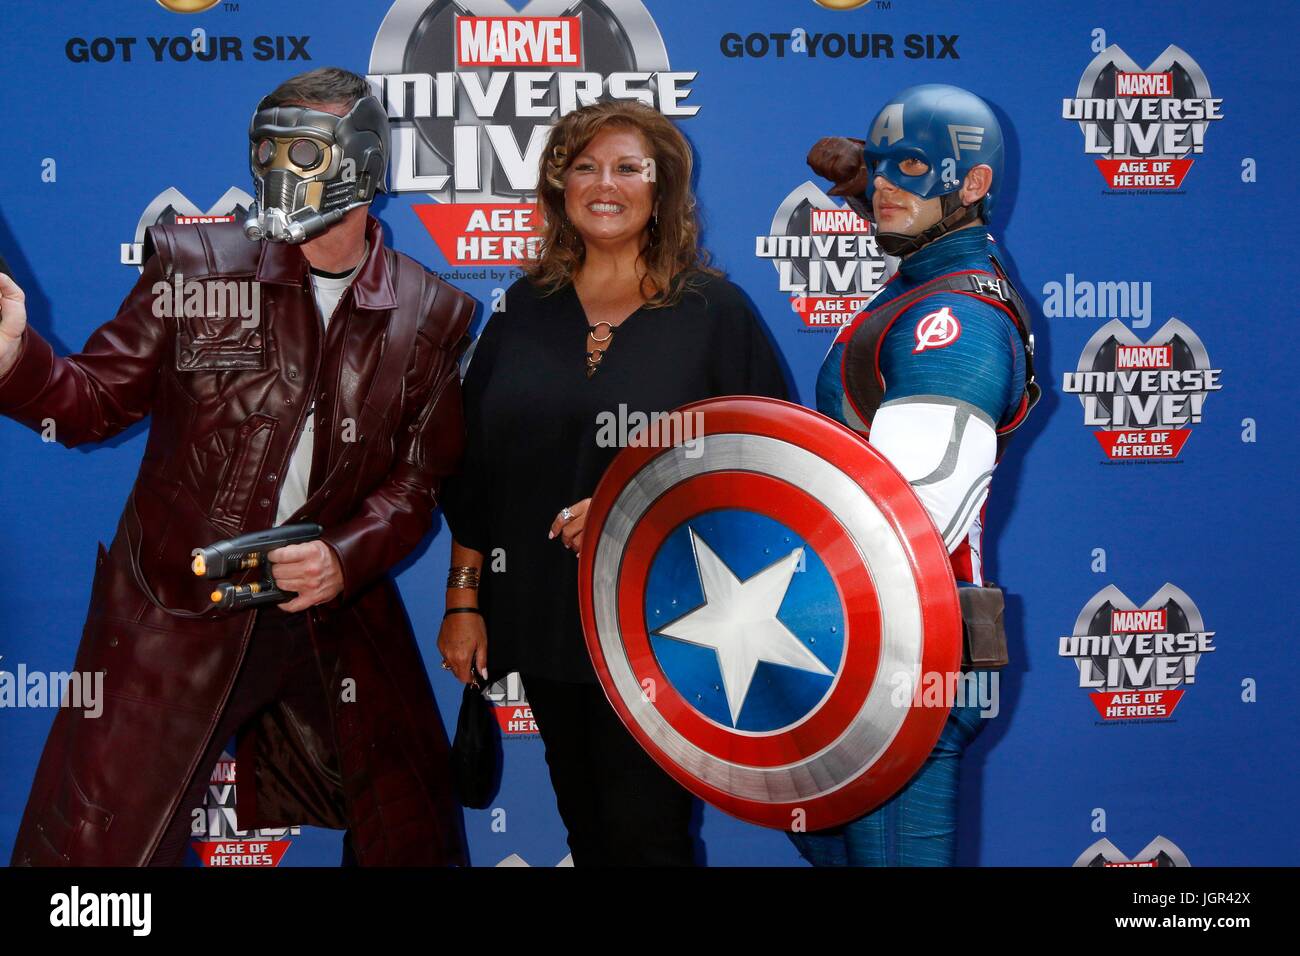 Los Angeles, CA, USA. 8th July, 2017. Star-Lord, Abby Lee Miller, Captain America at arrivals for Marvel Universe Live Show Opening Weekend, Staples Center, Los Angeles, CA July 8, 2017. Credit: Priscilla Grant/Everett Collection/Alamy Live News Stock Photo